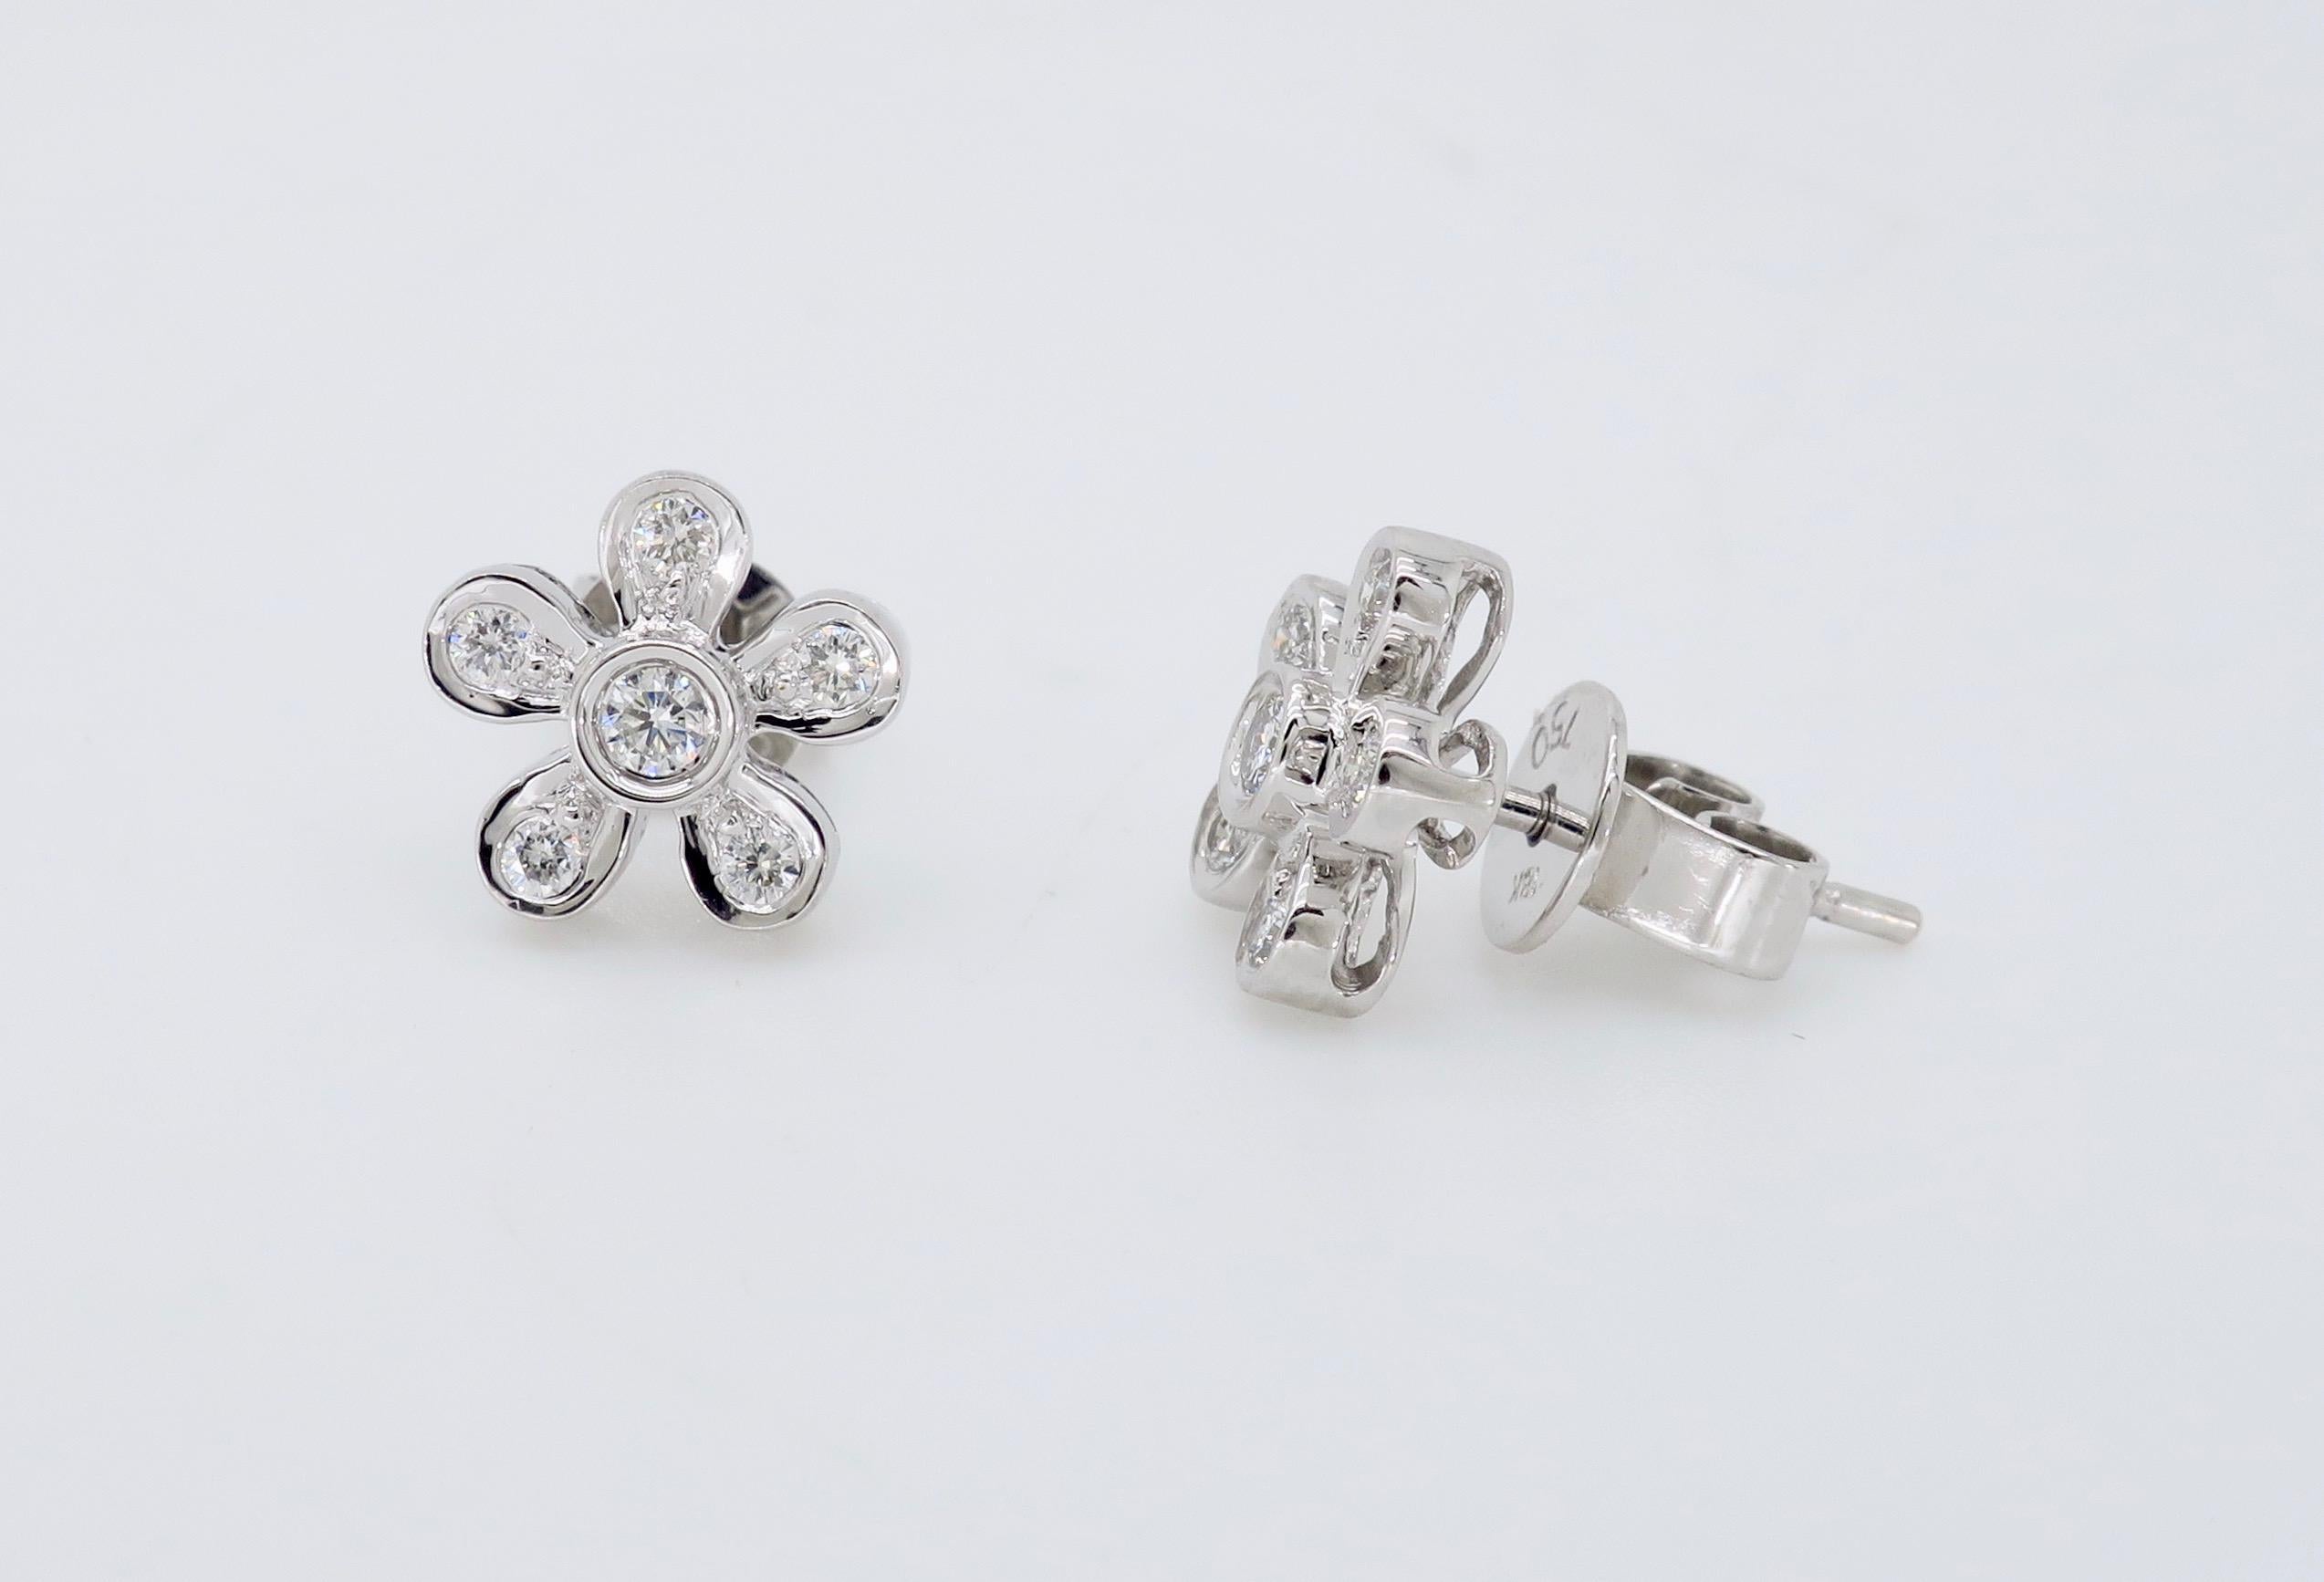 Daisy shaped Round Brilliant Cut diamond earrings crafted in 18k white gold.

Diamond Carat Weight: Approximately .24CTW 
Diamond Cut: Round Brilliant Cut 
Color: Average H-J
Clarity: Average VS
Metal: 18K White Gold
Marked/Tested: Earrings Tested